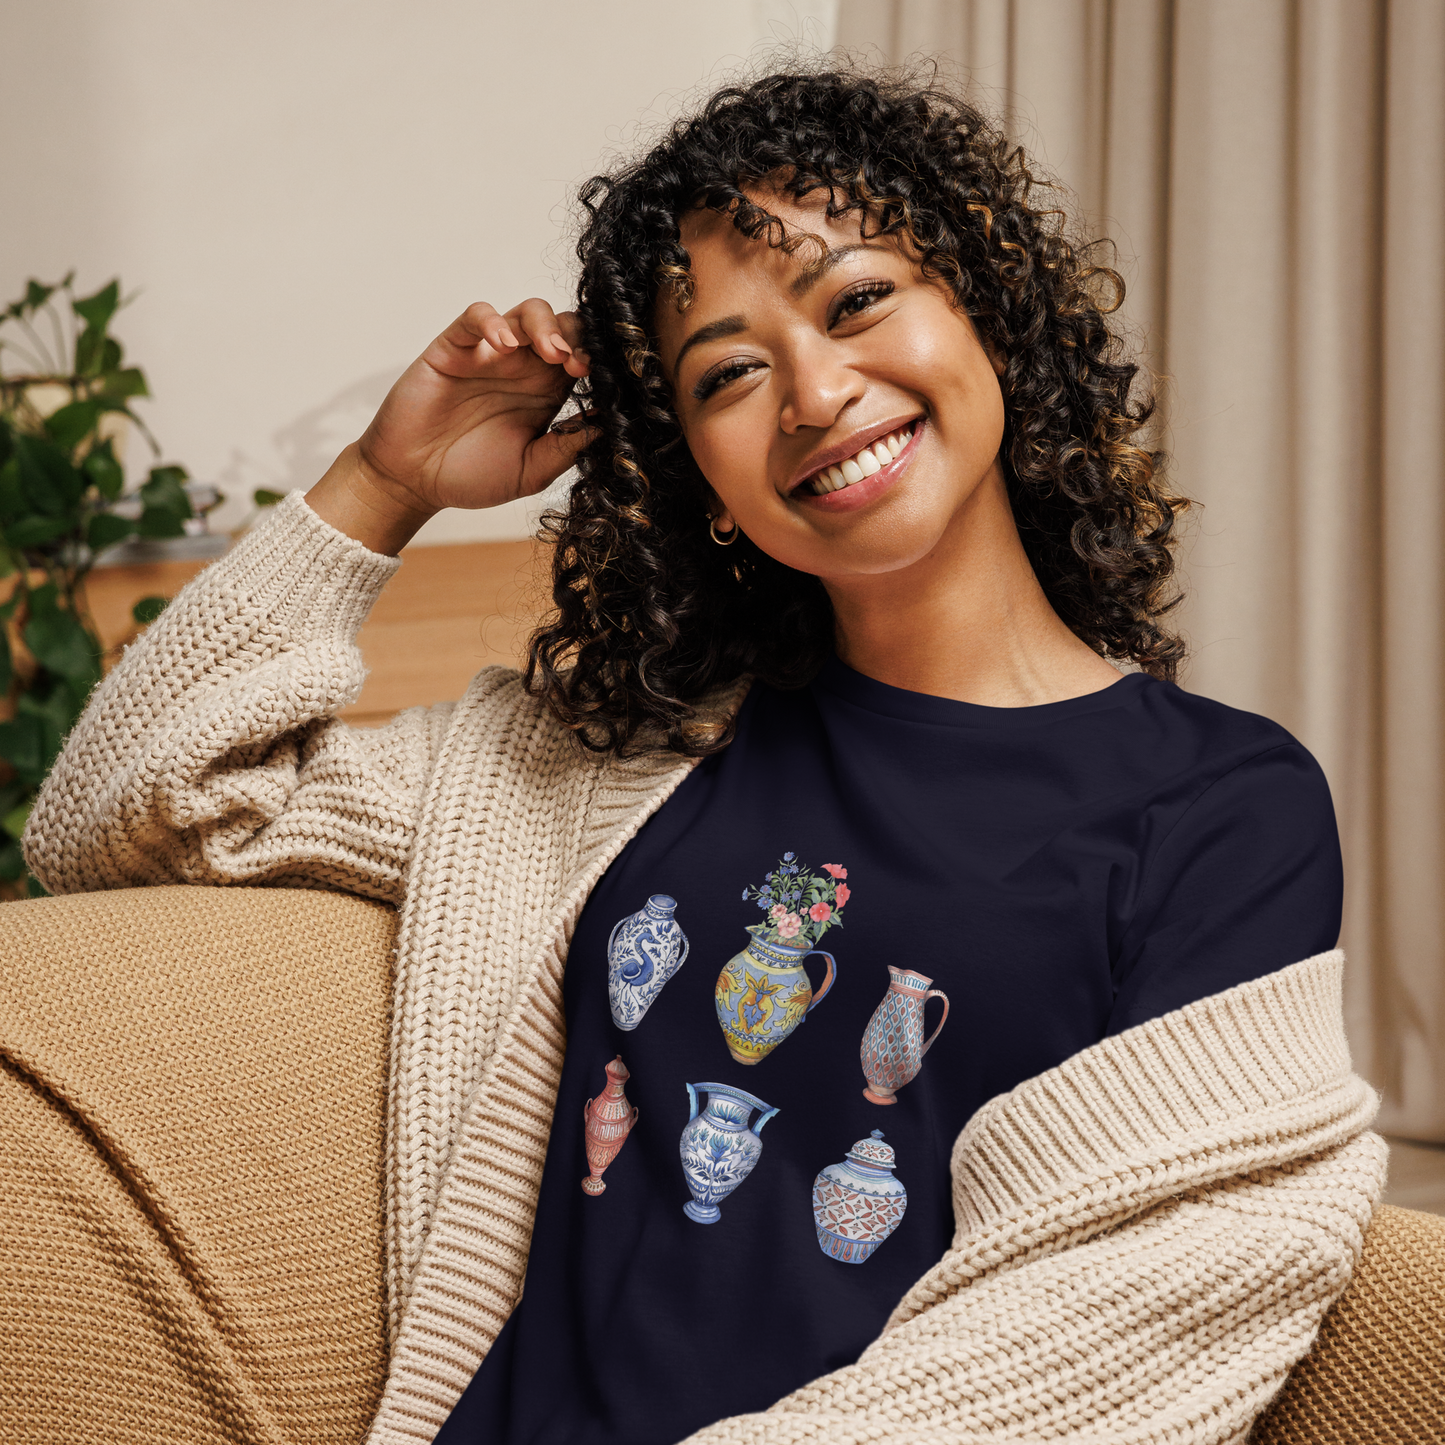 Smiling woman wearing a relaxed navy Vase t-shirt featuring a chic vase graphic on the chest - Women's Artsy Graphic Vase Tees - Boozy Fox